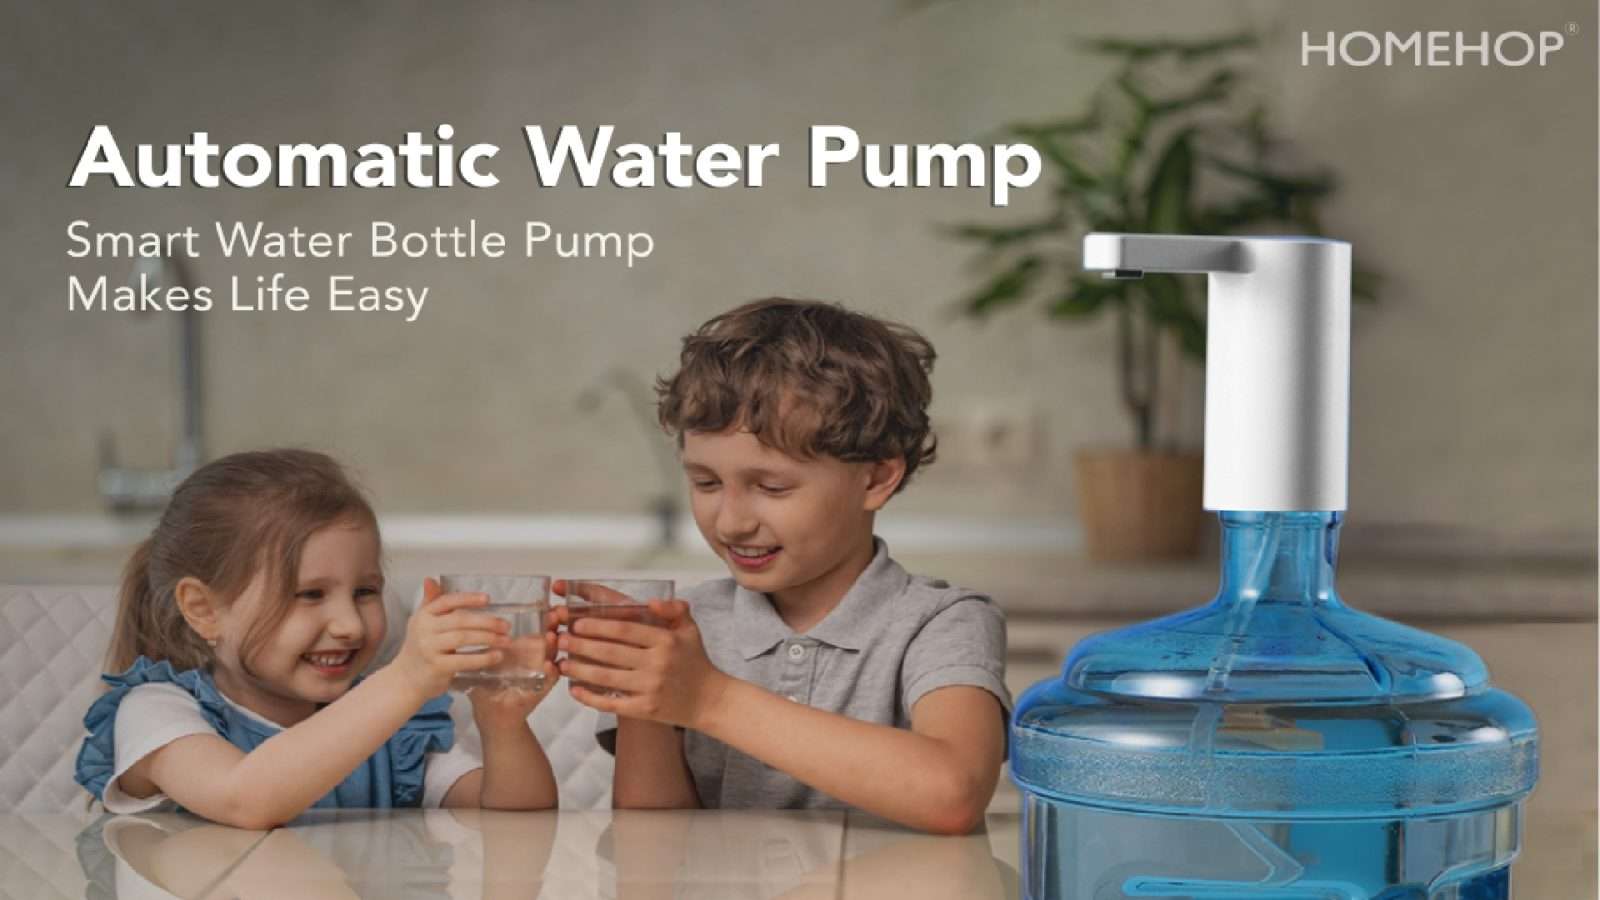 Homehop automatic water pump